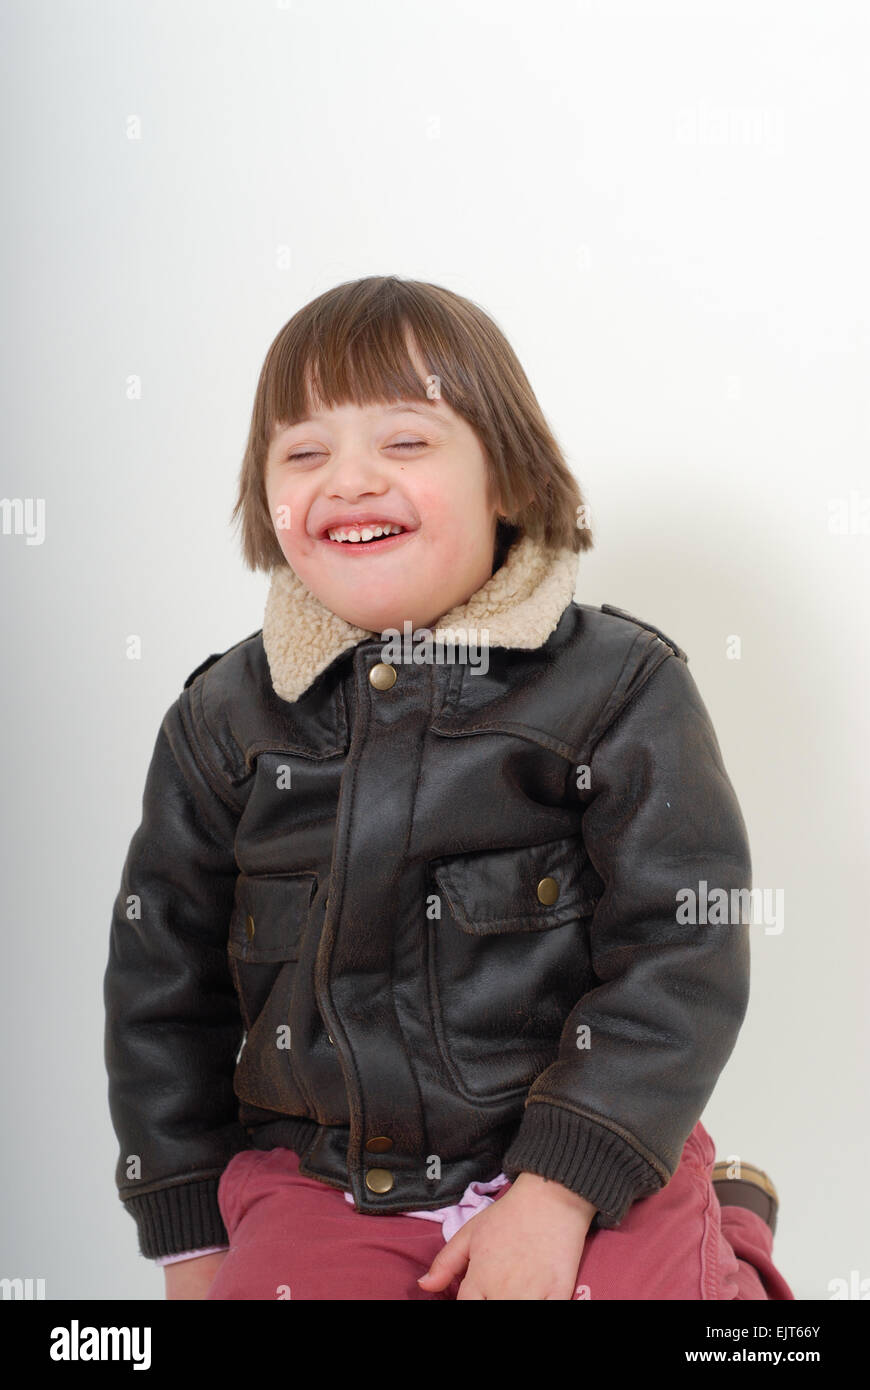 Boy with down syndrome smiling, isolated on white background. Stock Photo